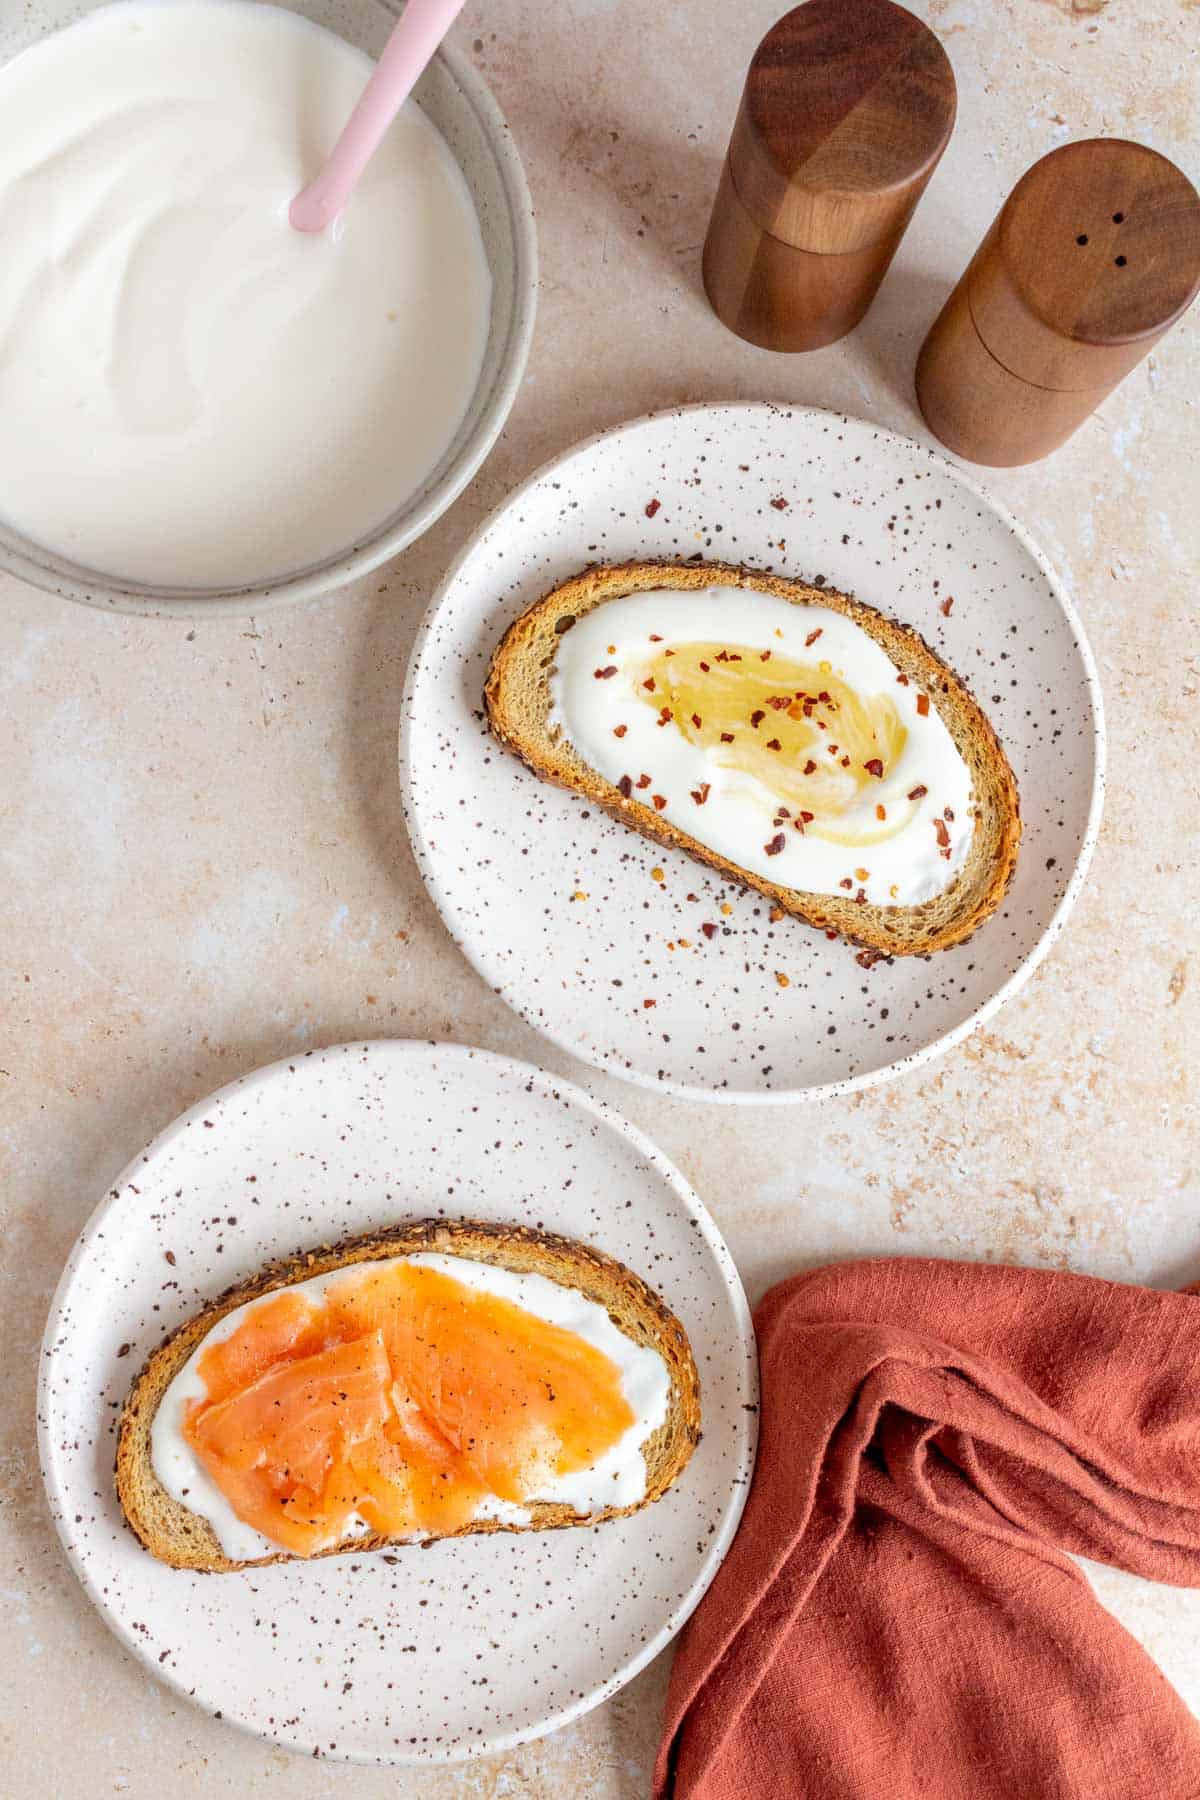 A plate with a piece of toast with whipped cottage cheese, honey, and red chili flakes beside another plate of toast with whipped cottage cheese topped with smoked salmon and pepper.